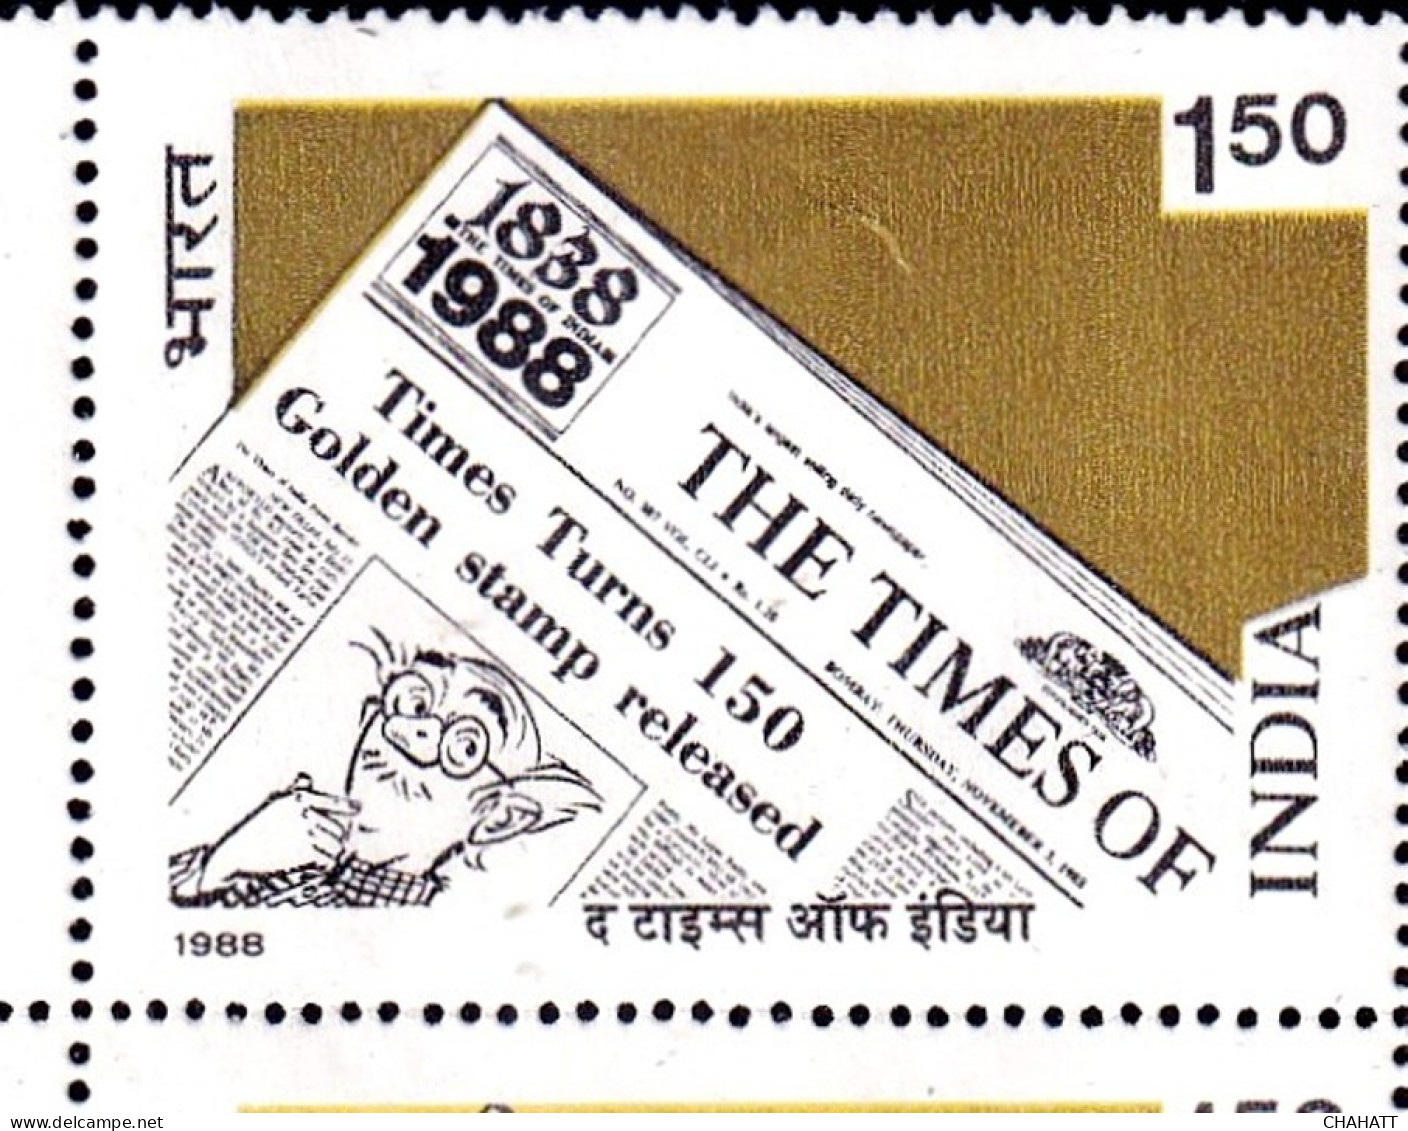 INDIA-1988-THE TIMES OF INDIA-BLOCK OF 4-ERROR- GOLD PHOSPHOR MISSING-DRY PRINT-MNH-IE-48 - Errors, Freaks & Oddities (EFO)